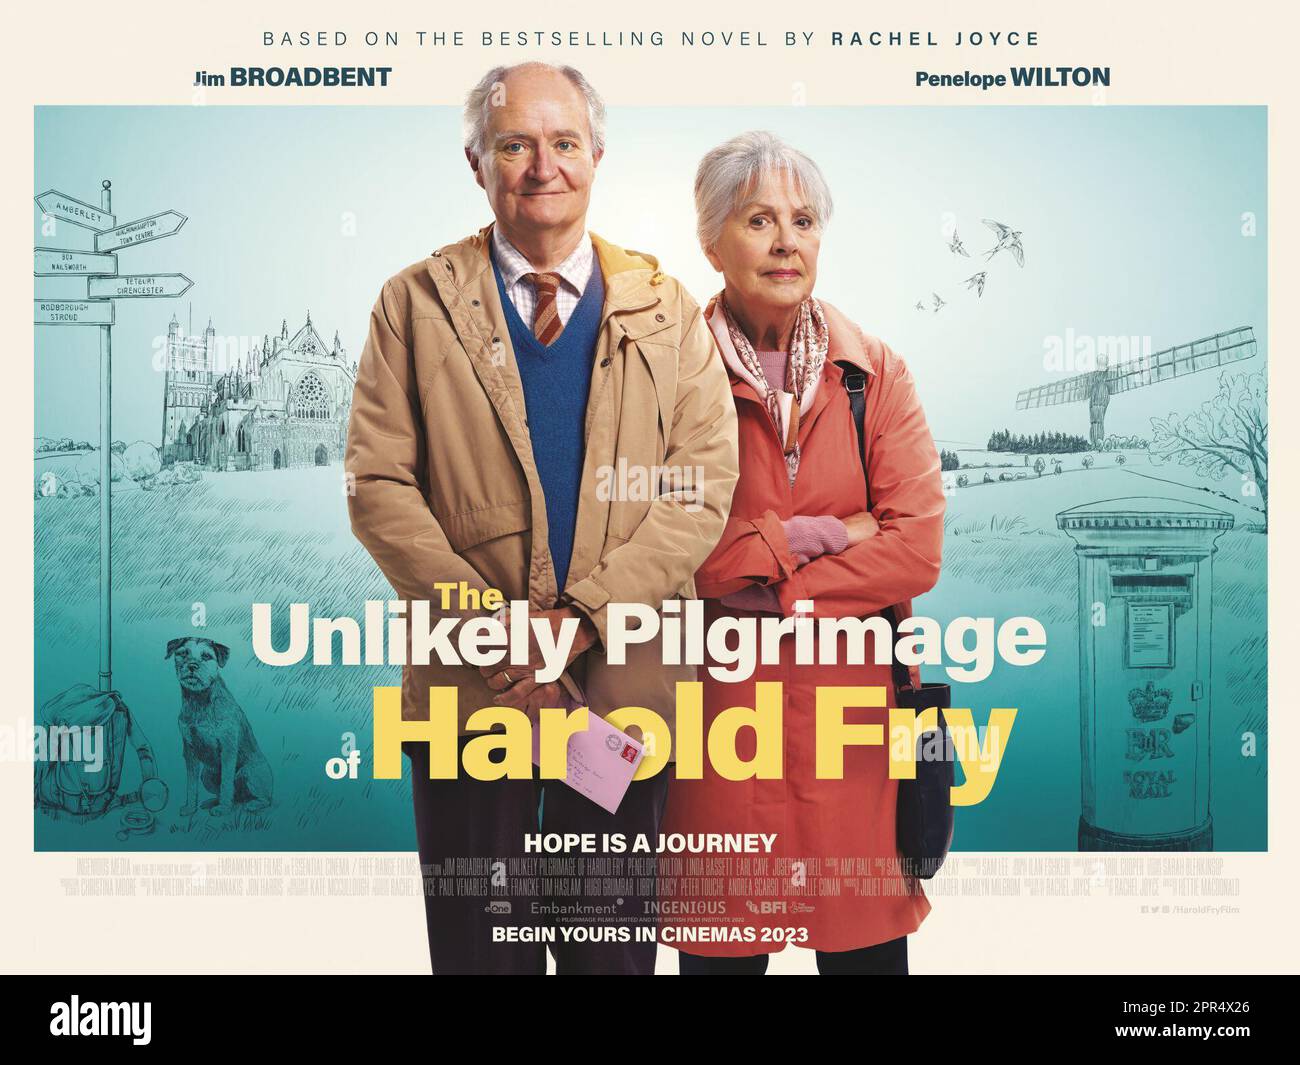 The Unlikely Pilgrimage of Harold Fry poster Stock Photo